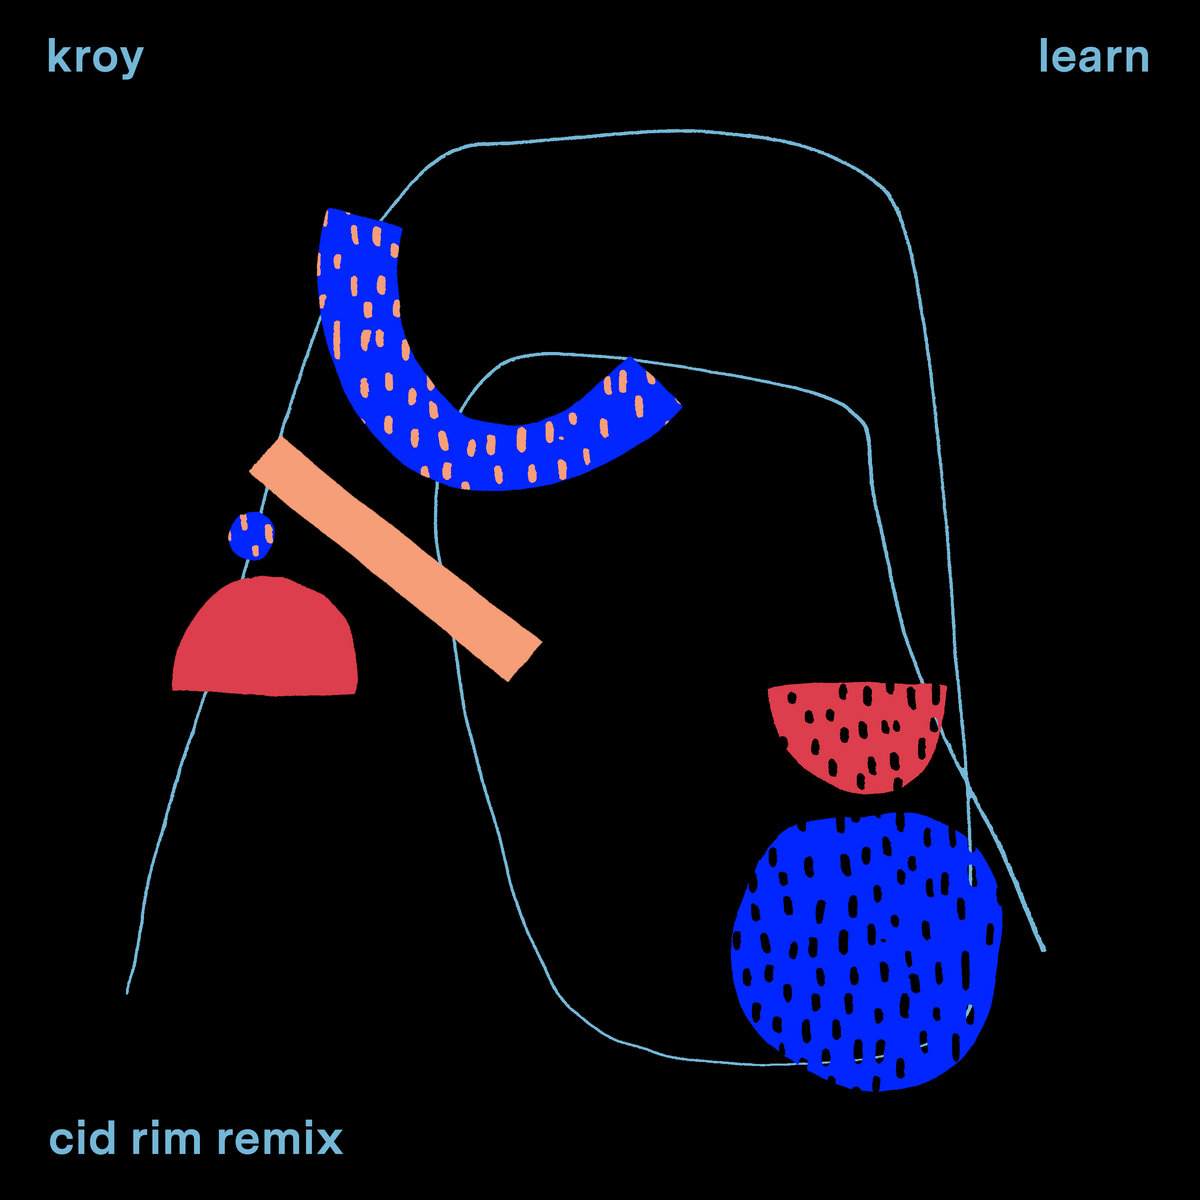 Learn remix cover art